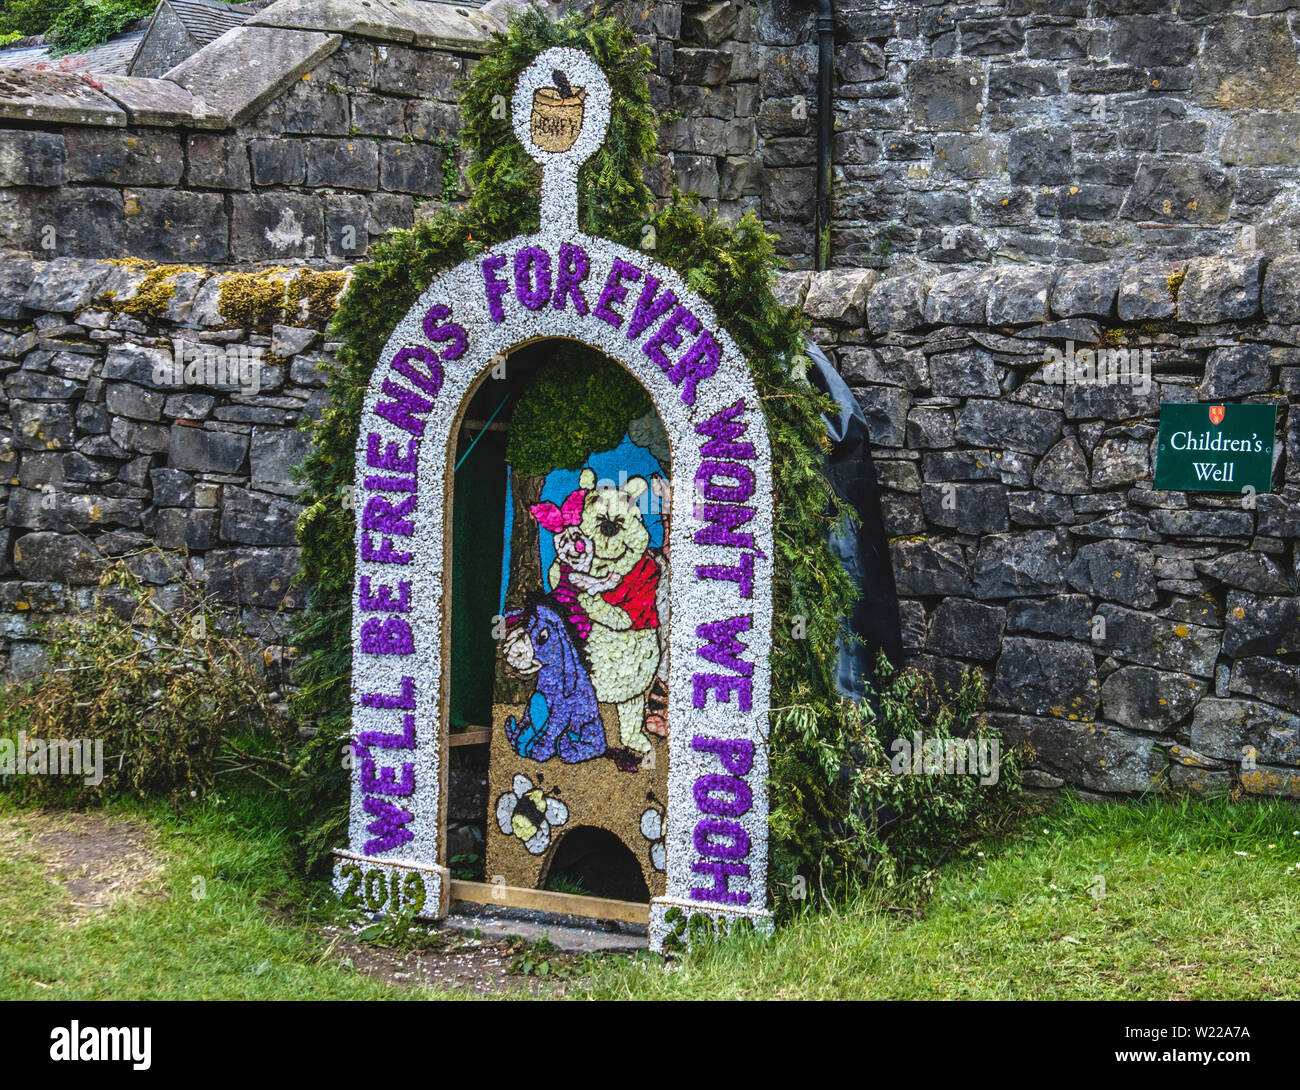 Well dressing is an annual Whitsuntide tradition dating back hundreds of years and closely associated with Tissington and the Derbyshire Peak District Stock Photo